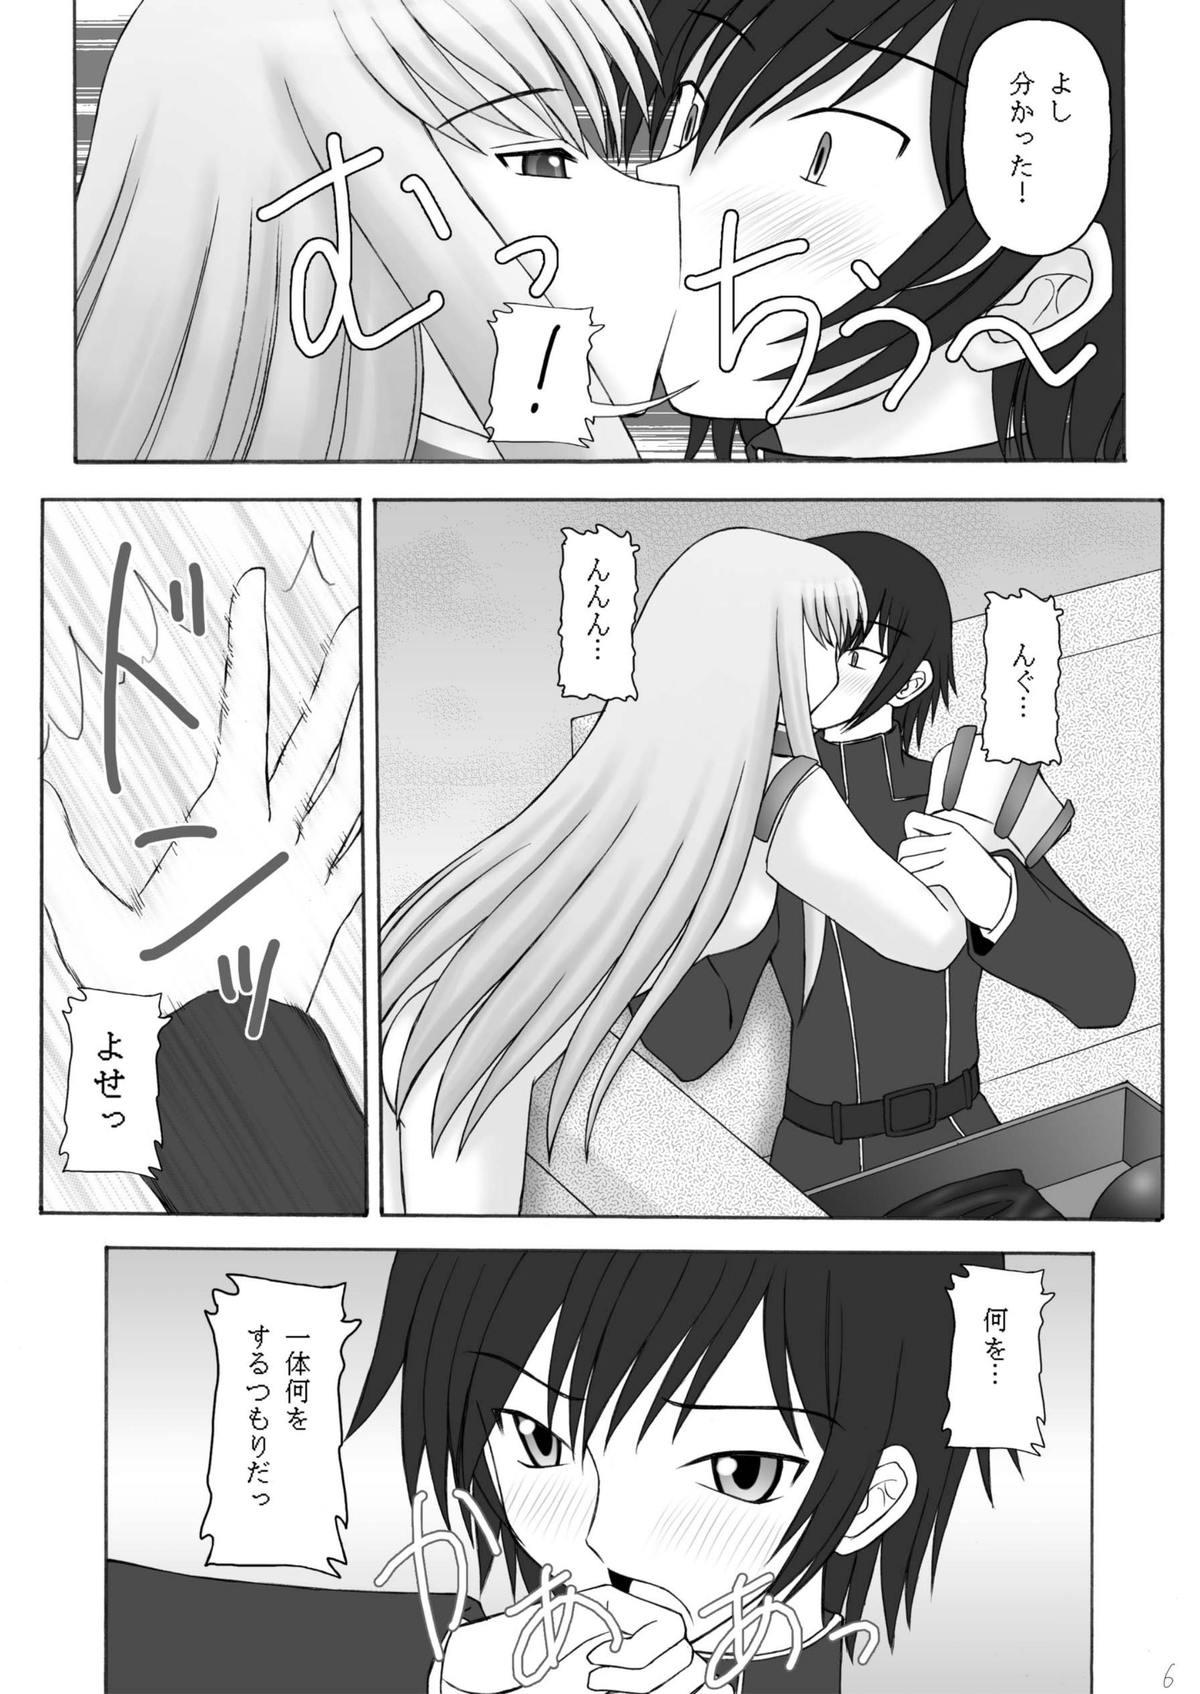 Ano C×2 - Code geass Trannies - Page 6